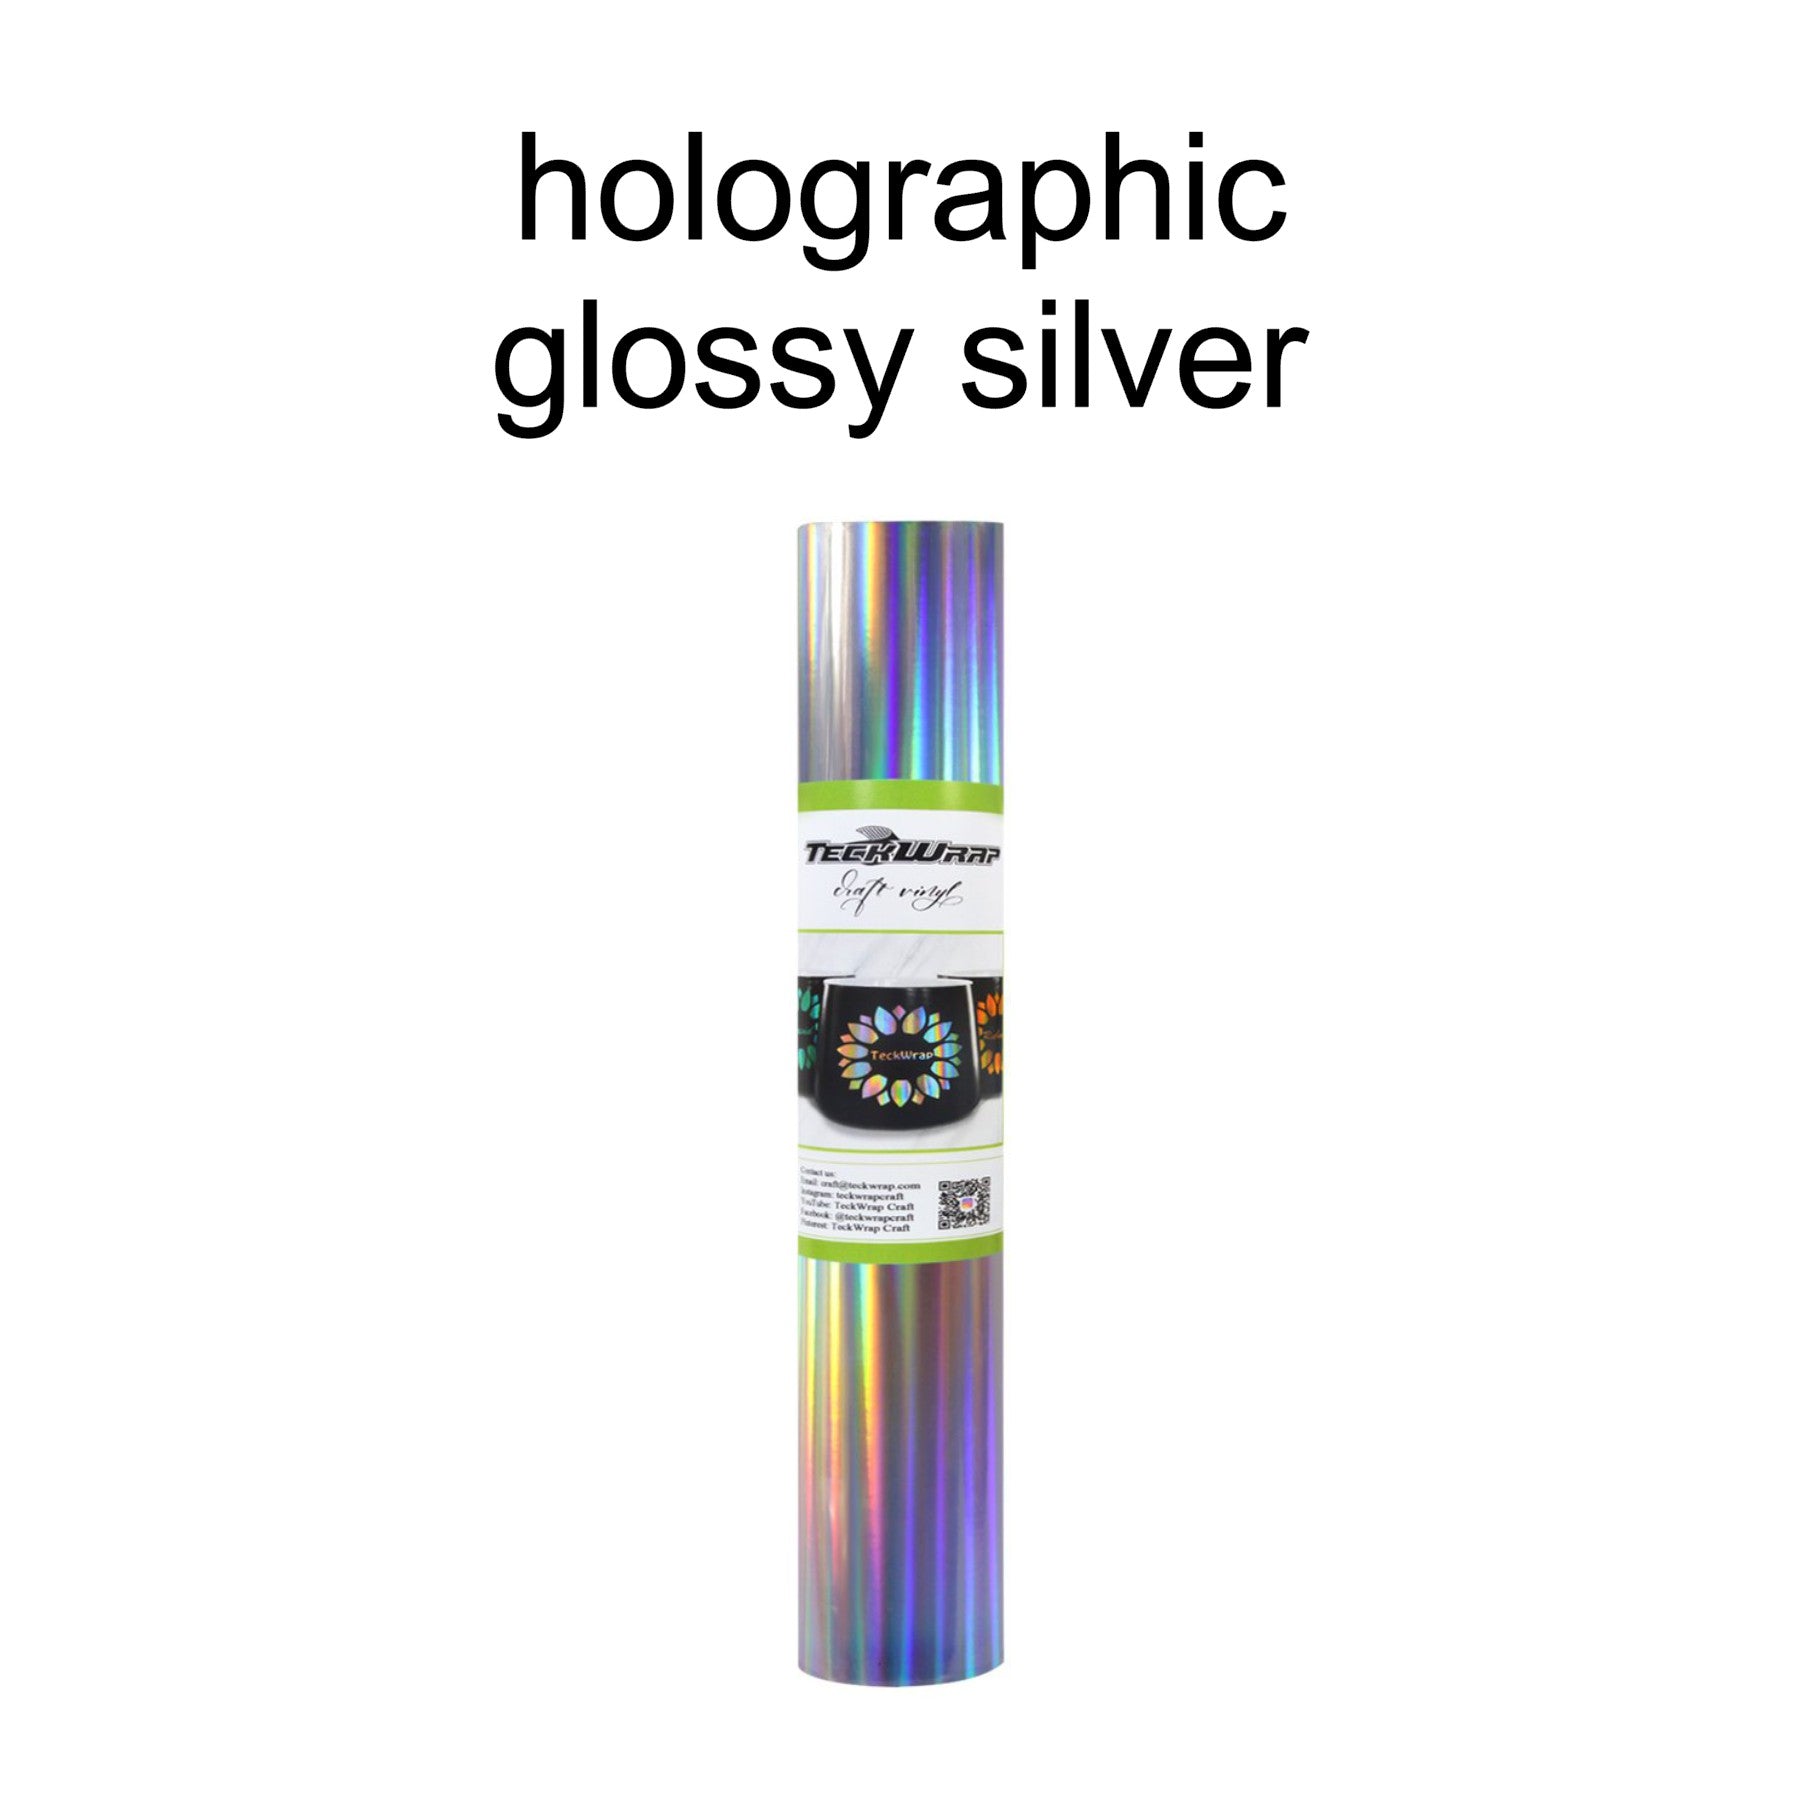 Holographic Glossy Silver Adhesive